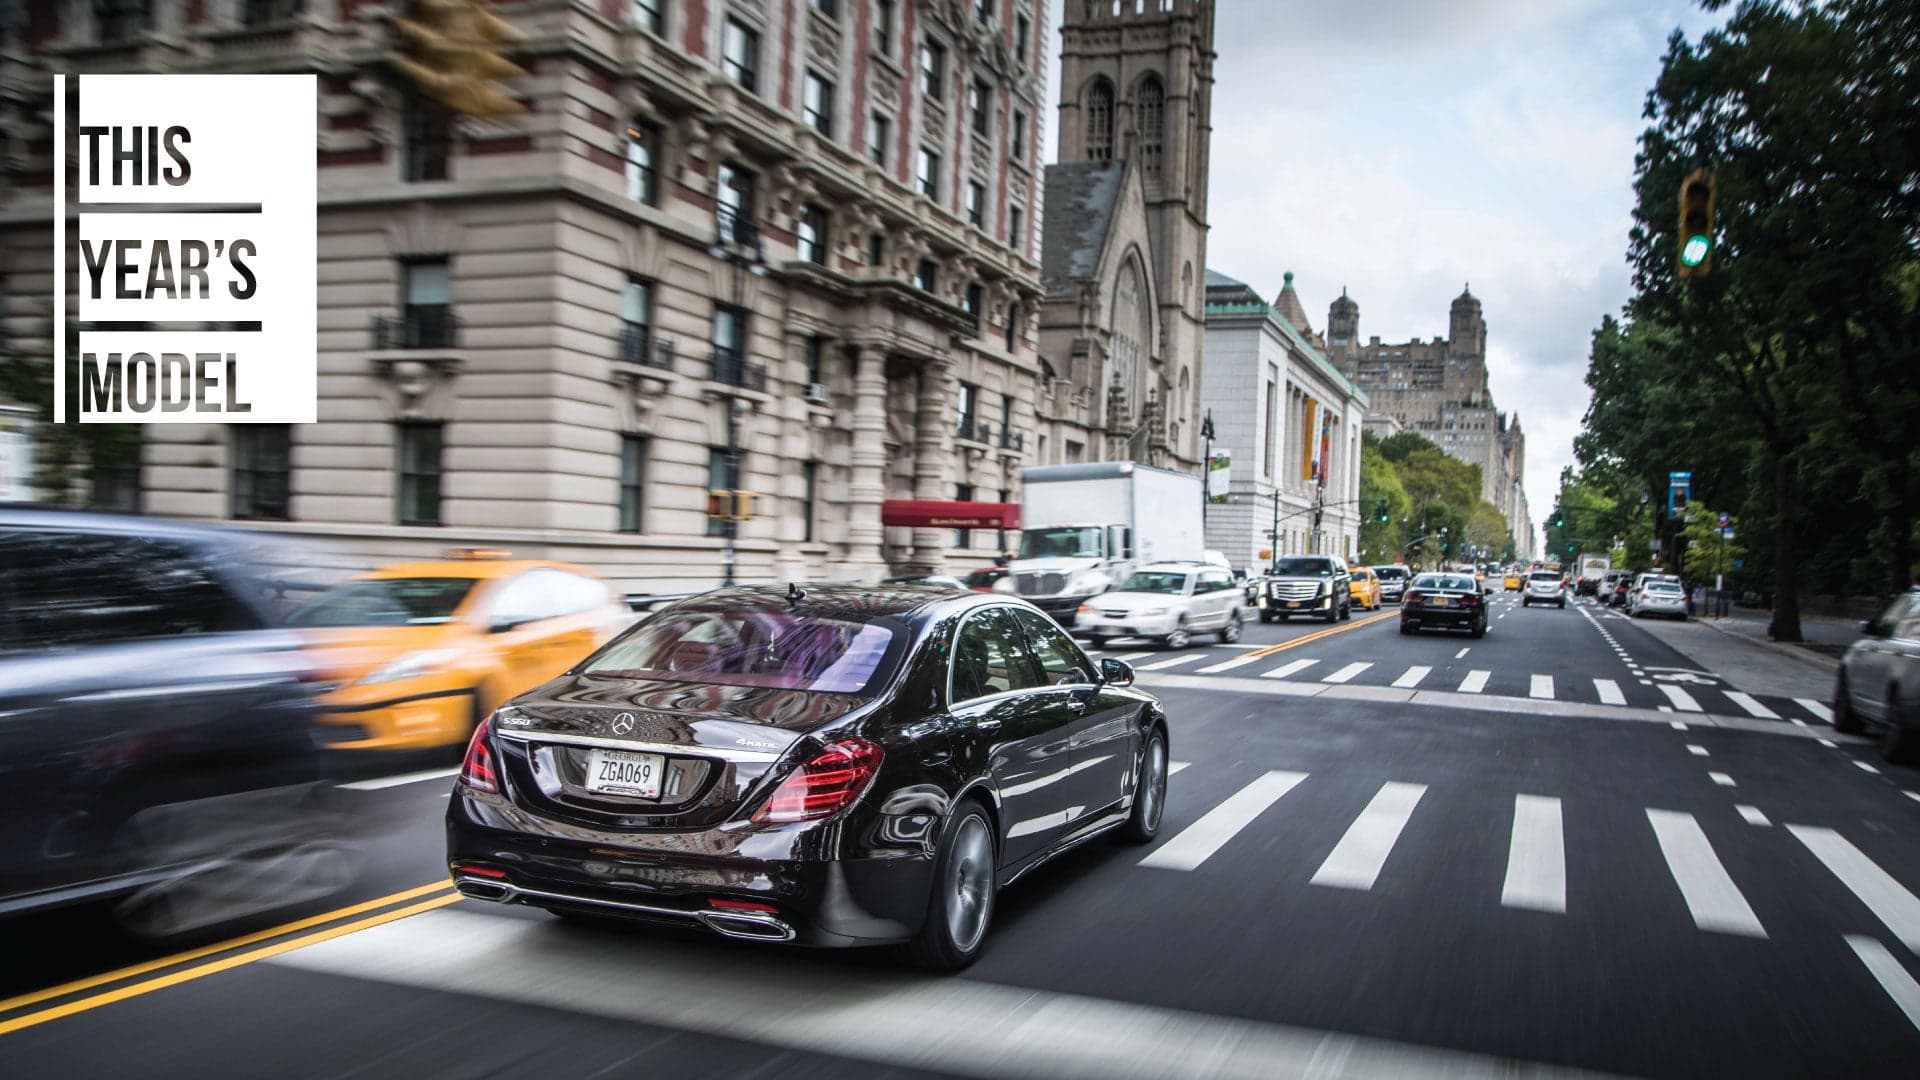 The 2018 Mercedes-Benz S-Class Takes Manhattan by Storm